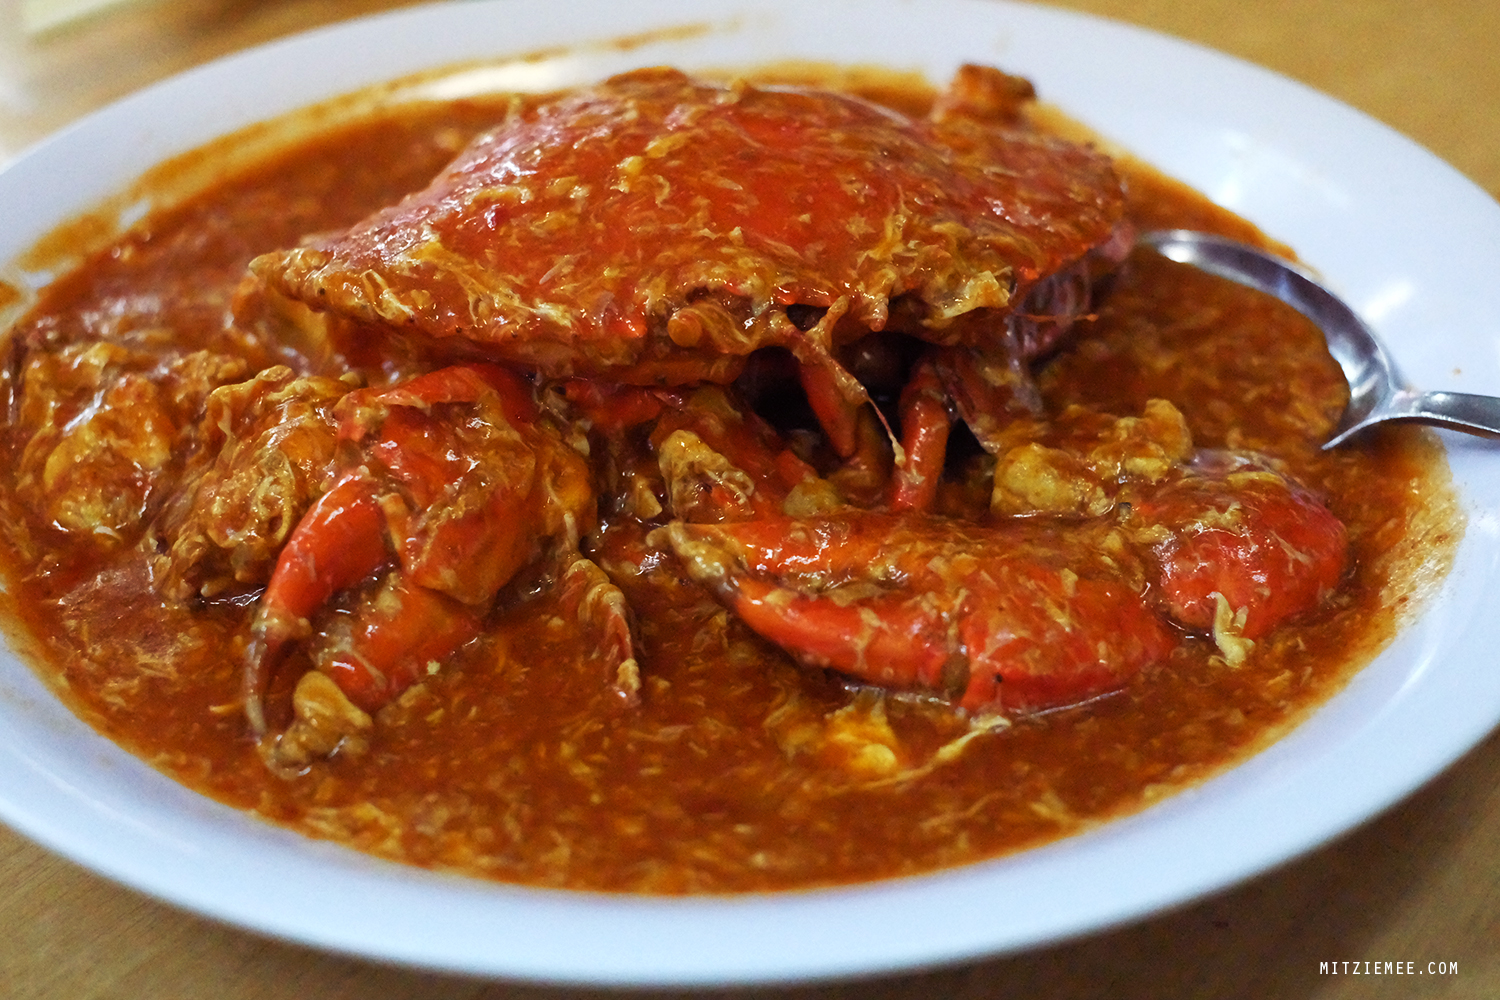 No Signboard, Chilli crab in Singapore